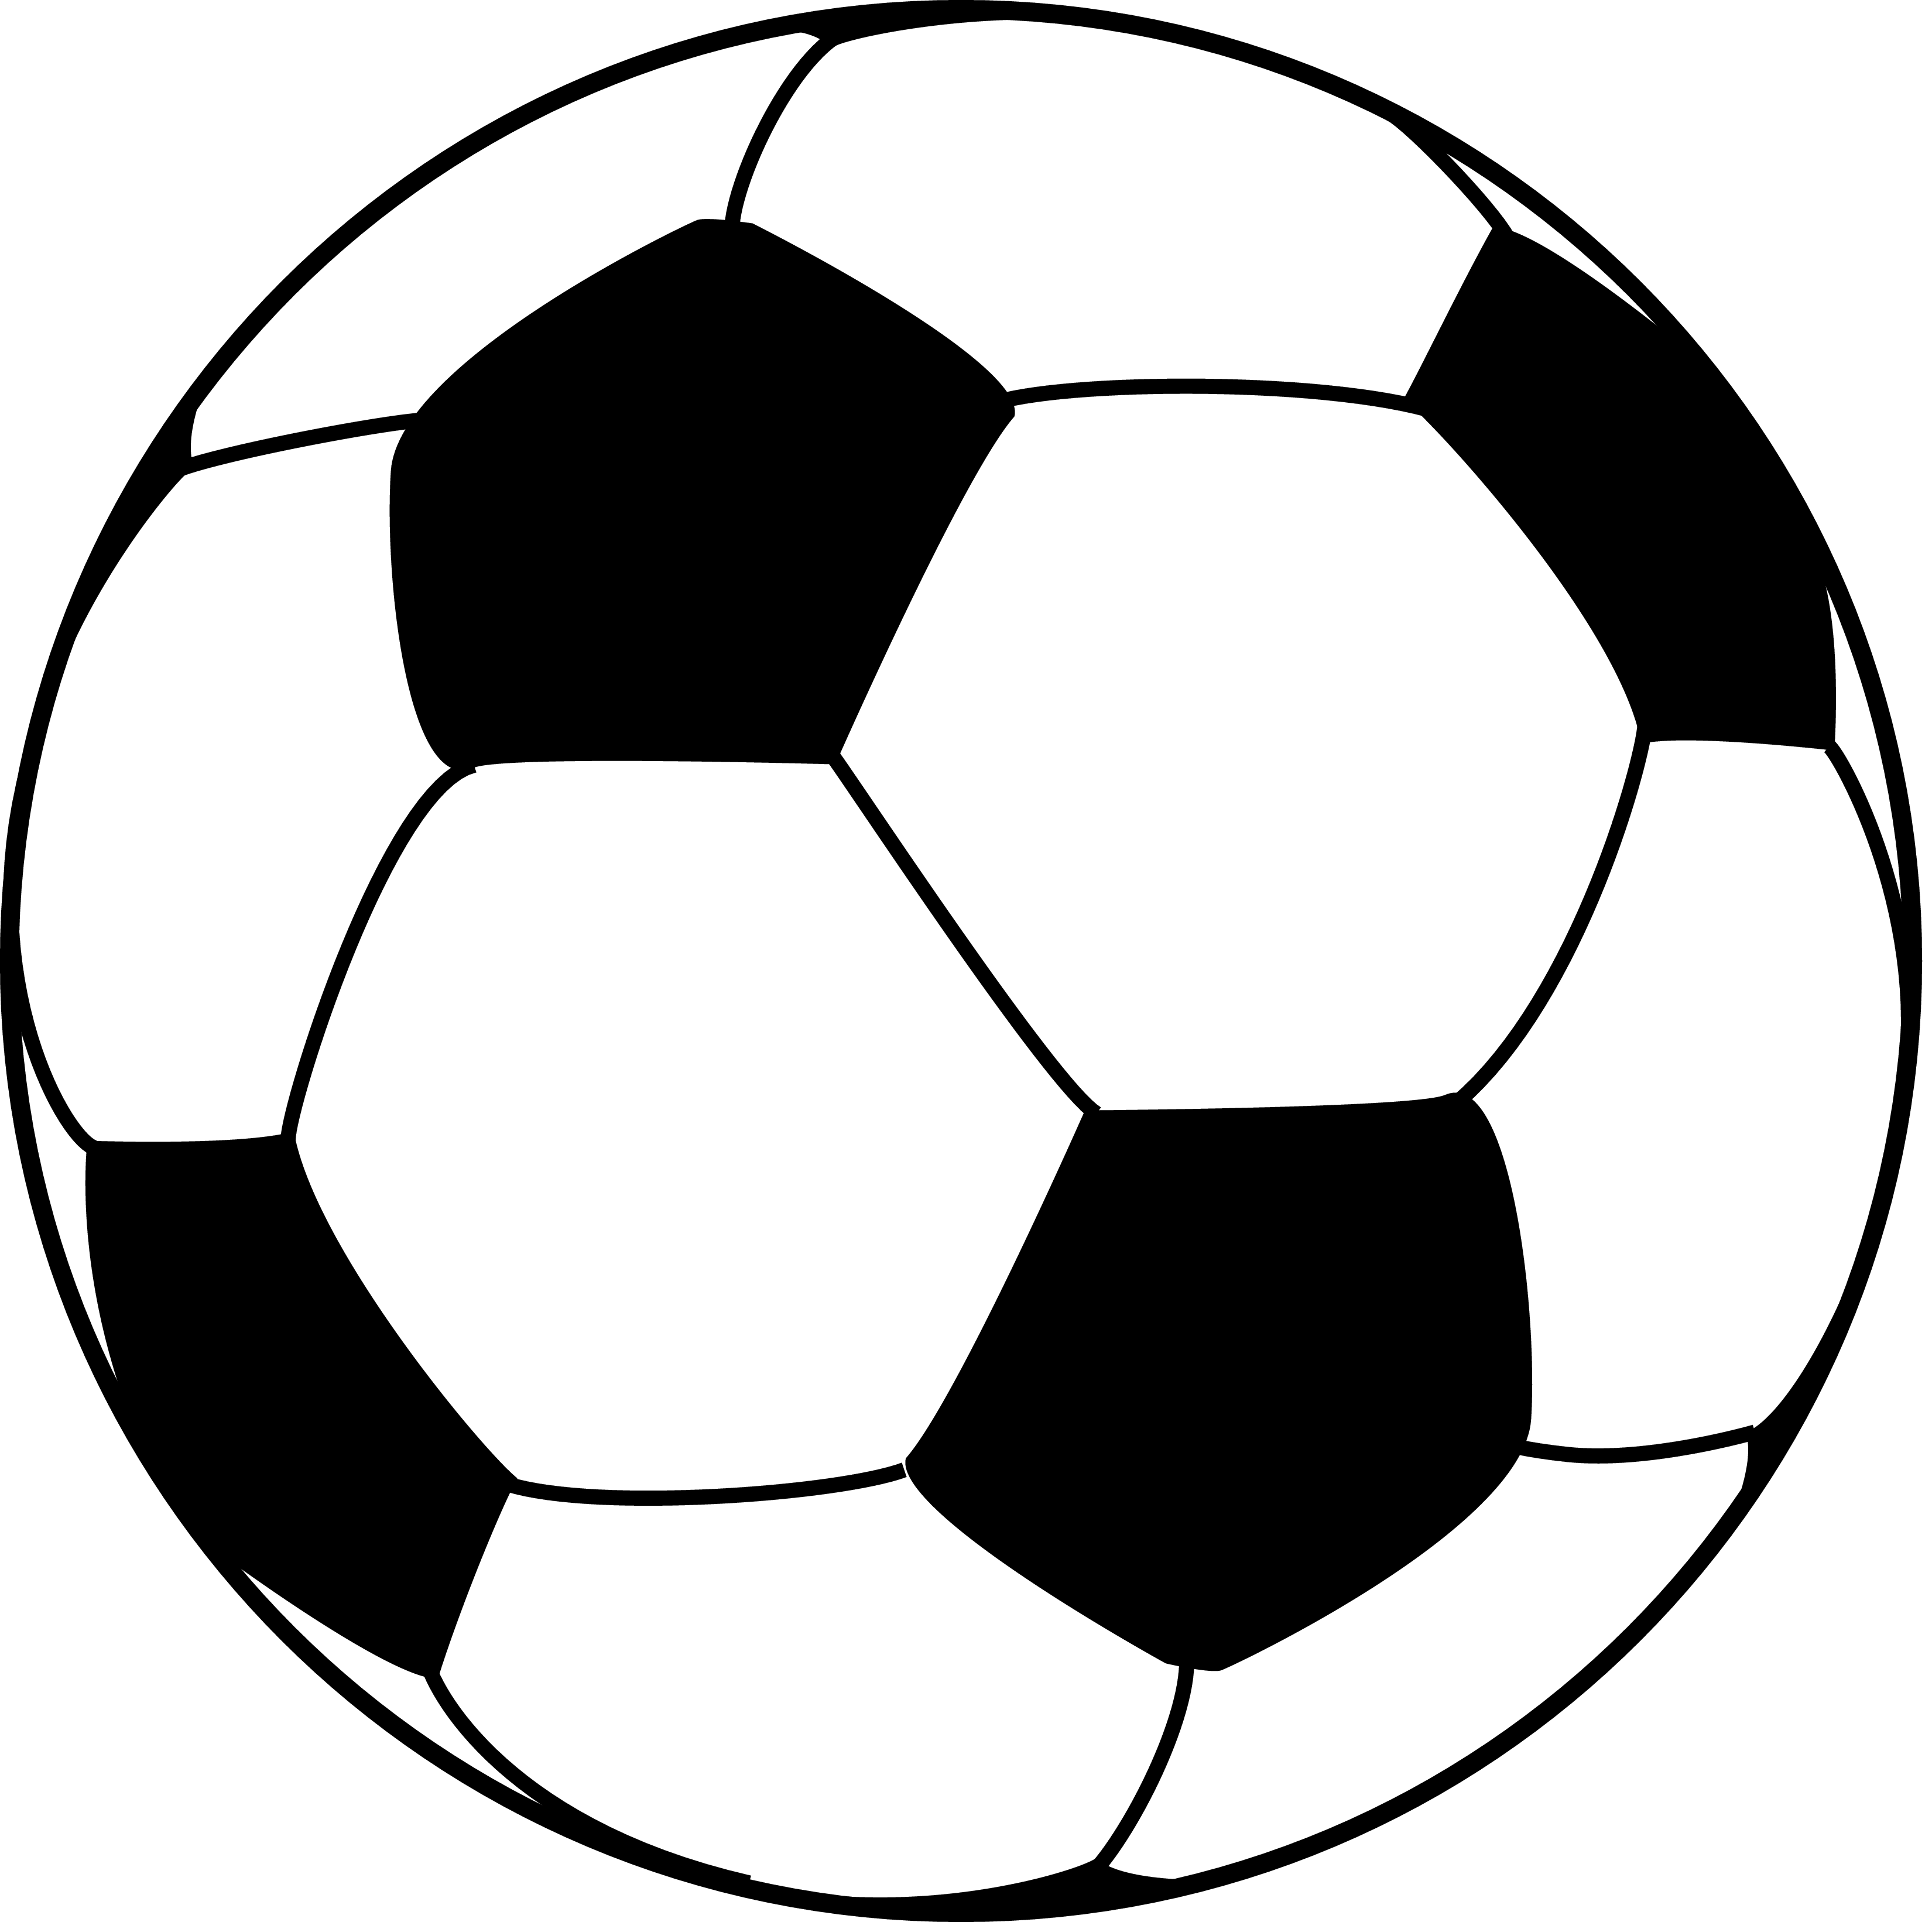 Ball drawing easy at. Dad clipart soccer